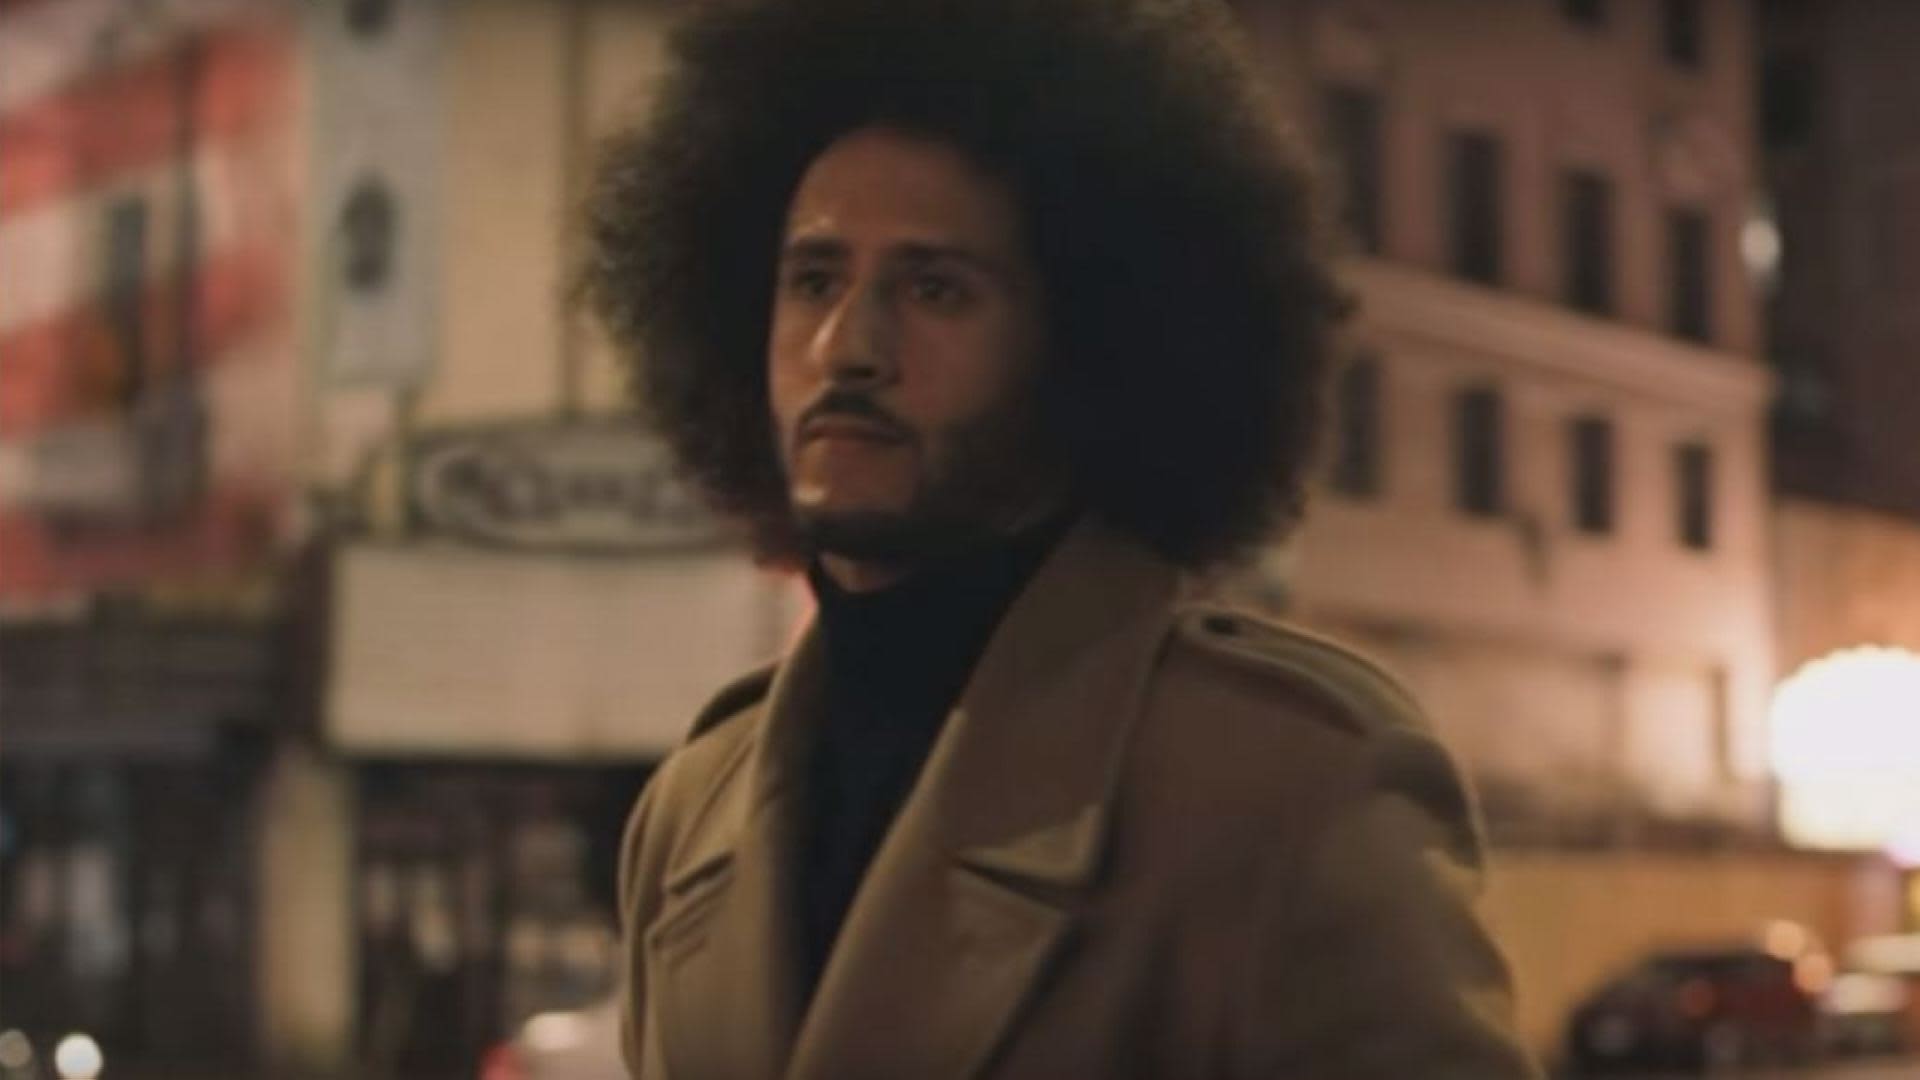 Chimenea mini Auckland Here's Nike's full ad featuring Colin Kaepernick and other athletes